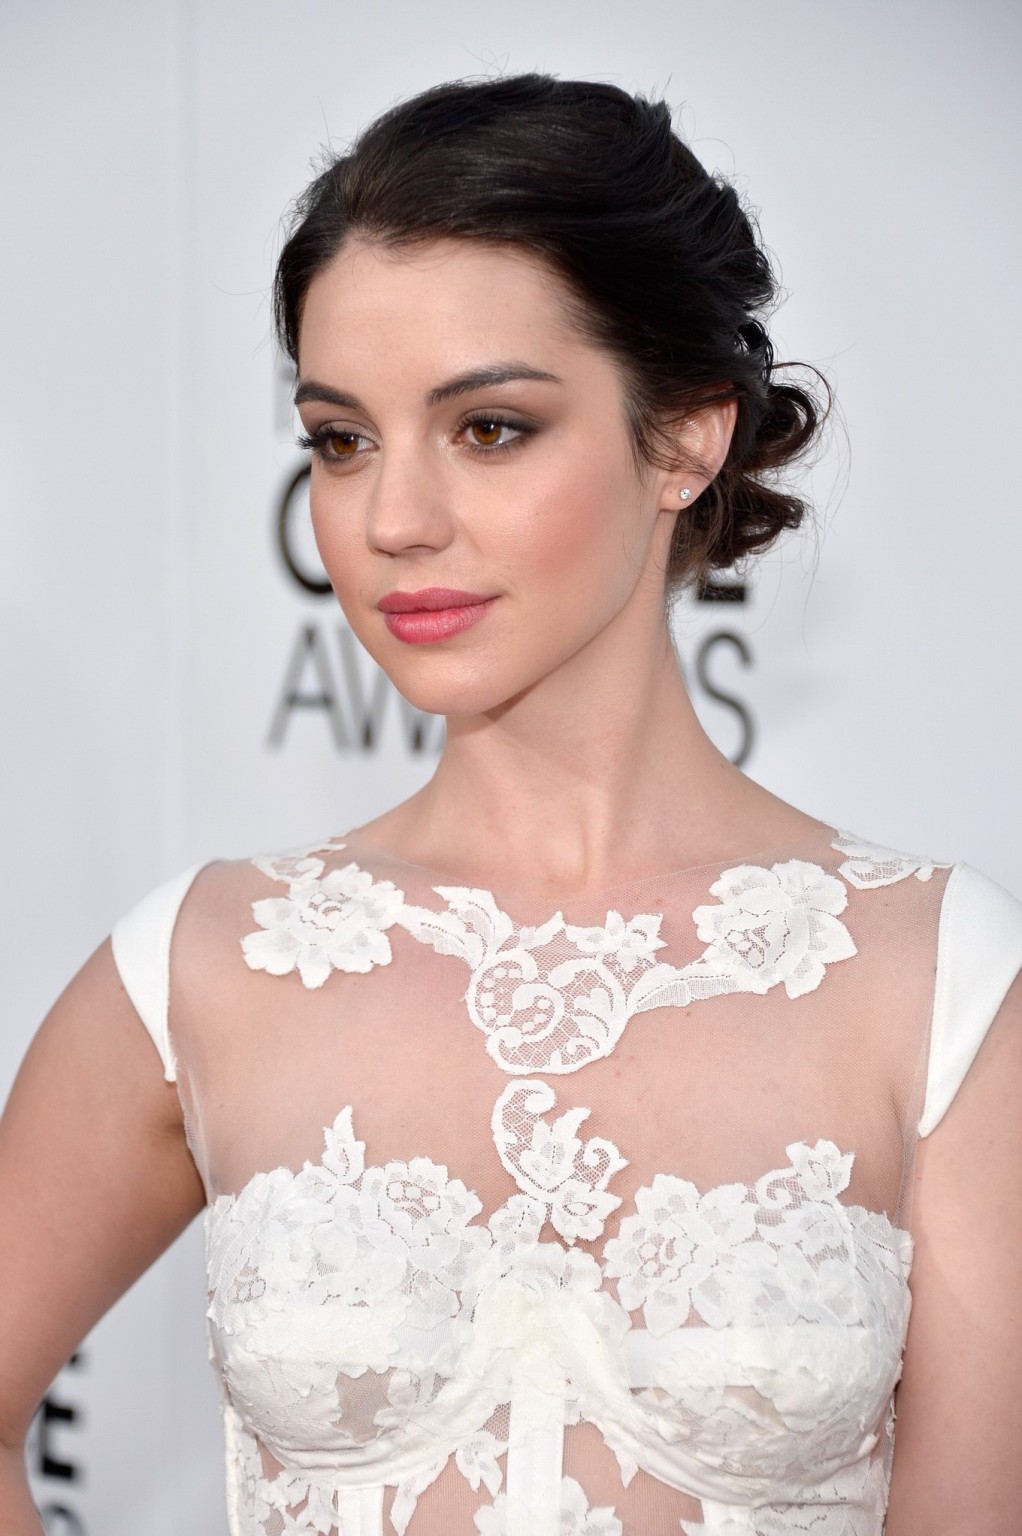 Adelaide Kane braless wearing a partially see through dress at the 40th annual P #75207658